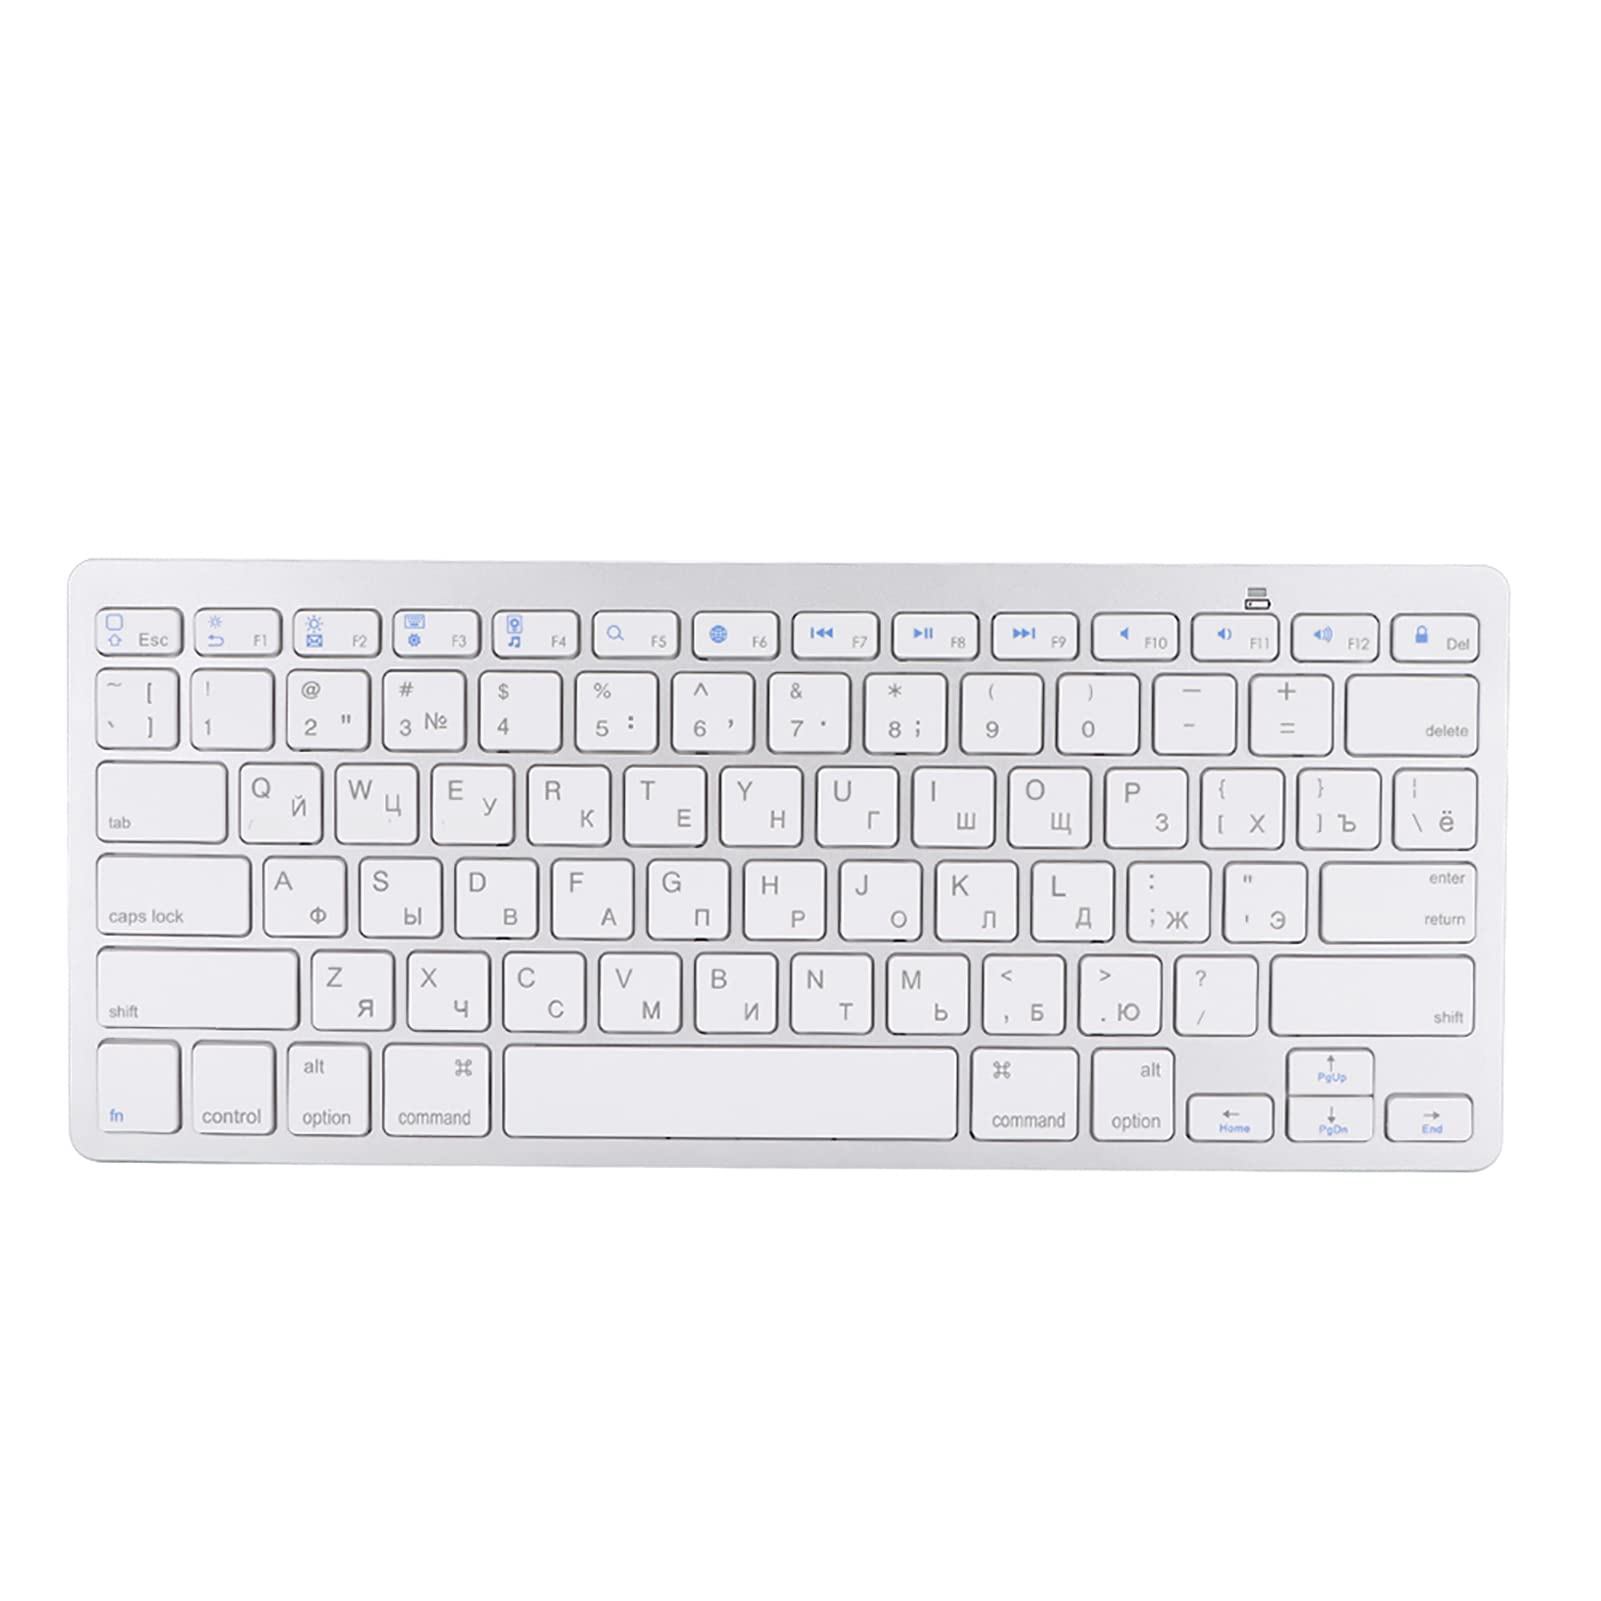 Russian Wireless BT Keyboard,Multi-Functional Ultra-Thin Professional Brightness Adjustment Keyboard,for iOS Mobile Phone/for Windows/for Android